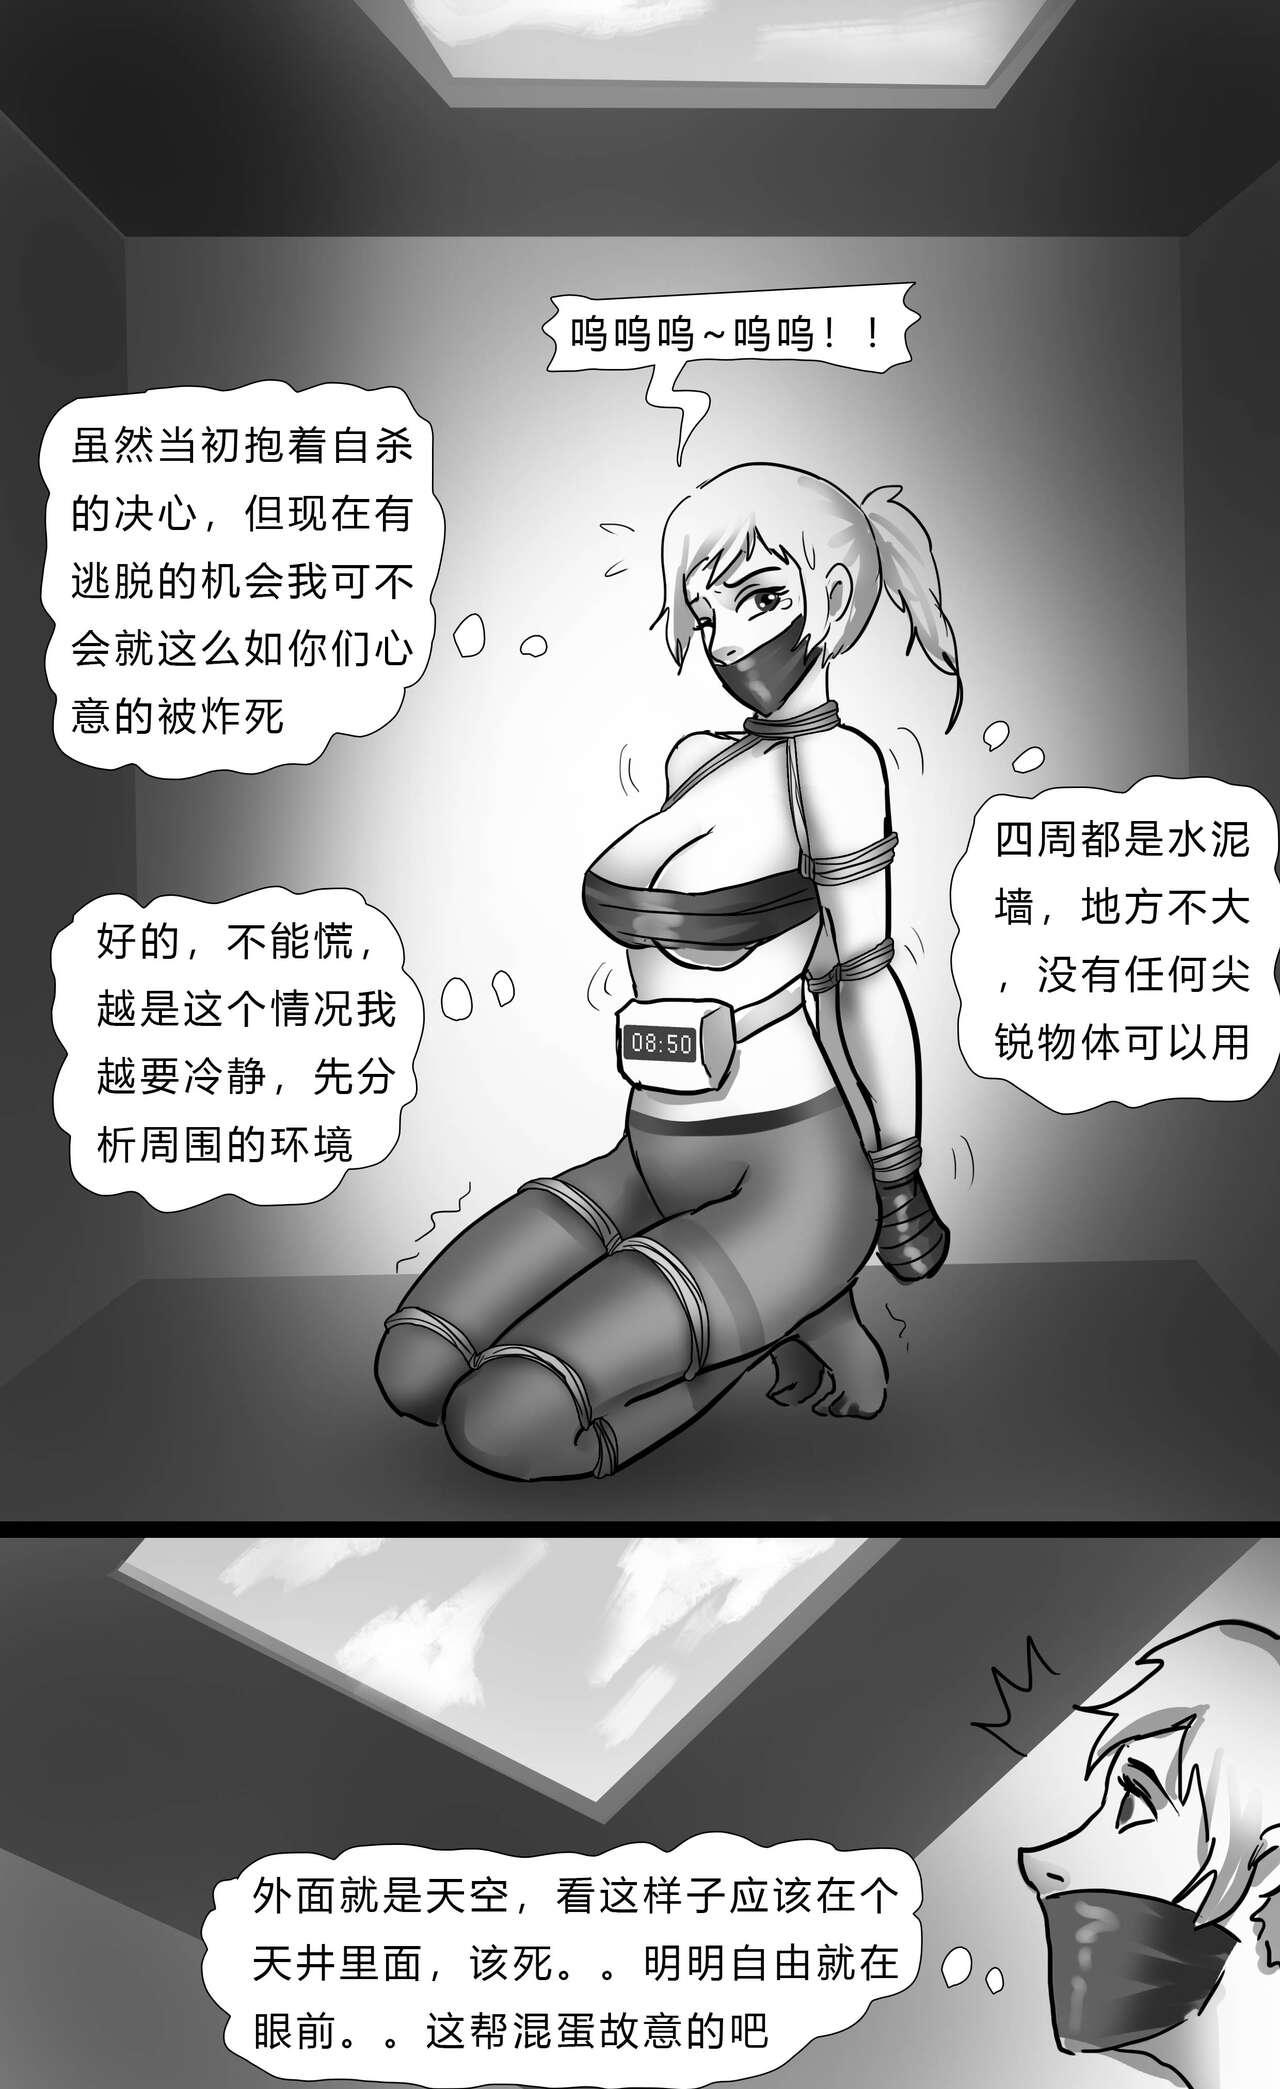 Rough Fuck 致命倒计时 Deadly Countdown Goth - Page 5